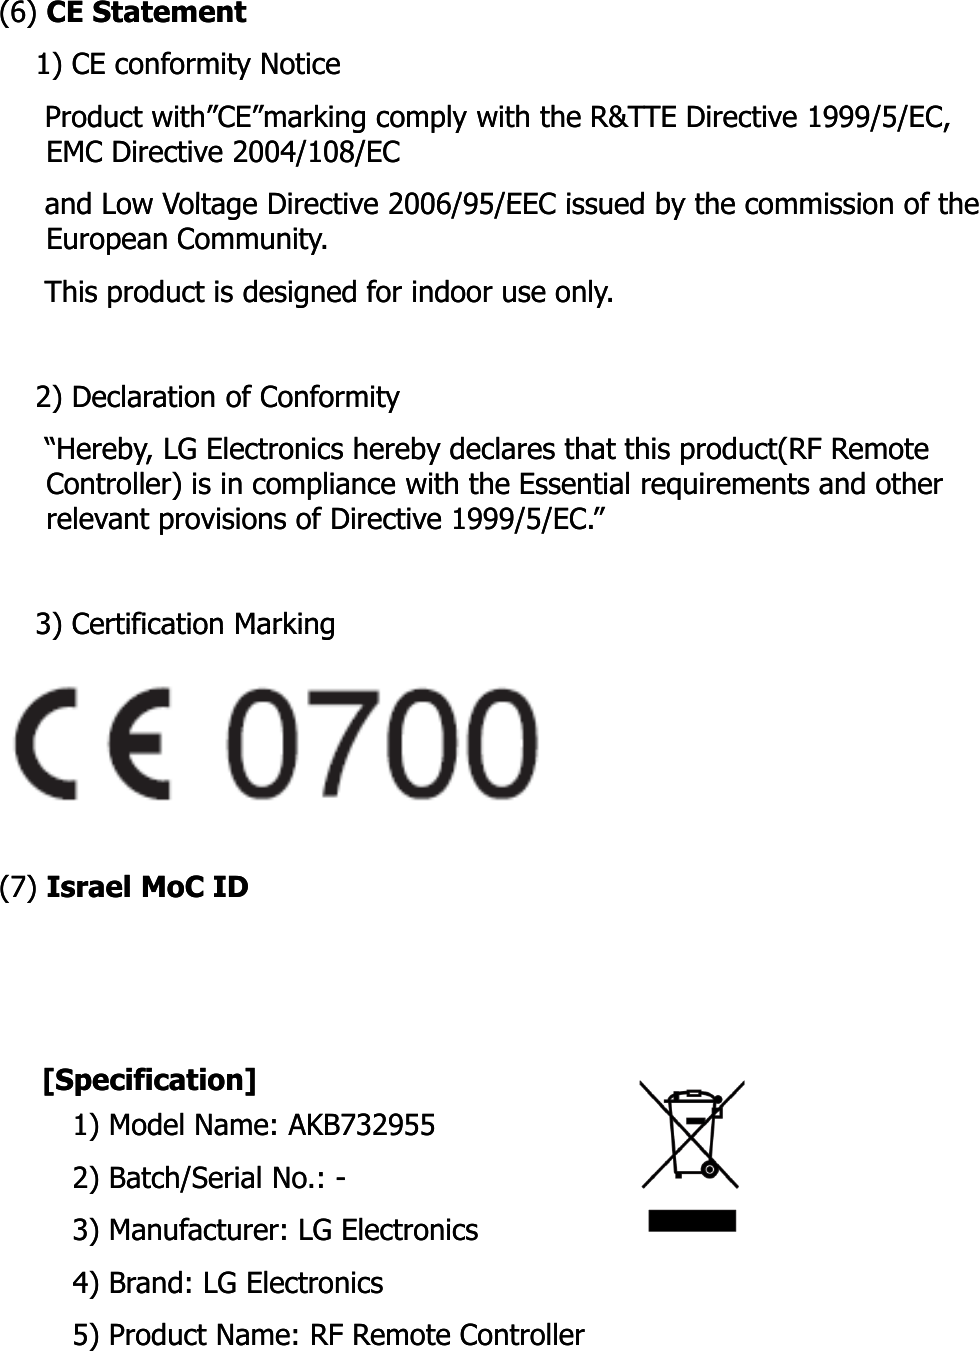 (6) (6) CE StatementCE Statement1) CE conformity Notice1) CE conformity NoticeProduct Product with”CE”markingwith”CE”marking comply with the R&amp;TTE Directive 1999/5/EC, comply with the R&amp;TTE Directive 1999/5/EC, EMC Directive 2004/108/ECEMC Directive 2004/108/ECand Low Voltage Directive 2006/95/EEC issued by the commission of theand Low Voltage Directive 2006/95/EEC issued by the commission of theand Low Voltage Directive 2006/95/EEC issued by the commission of the and Low Voltage Directive 2006/95/EEC issued by the commission of the European Community.European Community.This product is designed for indoor use only.This product is designed for indoor use only.2) Declaration of Conformity2) Declaration of Conformity“Hereby, LG Electronics hereby declares that this product(RF Remote “Hereby, LG Electronics hereby declares that this product(RF Remote Controller) is in compliance with the Essential requirements and other Controller) is in compliance with the Essential requirements and other relevant provisions of Directive 1999/5/EC.”relevant provisions of Directive 1999/5/EC.”3) Certification Marking3) Certification Marking3) Certification Marking3) Certification Marking(7) (7) Israel Israel MoCMoC IDID[Specification][Specification]1) Model Name: AKB7329551) Model Name: AKB7329552) Batch/Serial No.: 2) Batch/Serial No.: --3) Manufacturer: LG Electronics3) Manufacturer: LG Electronics)d l)d l4) Brand: LG Electronics4) Brand: LG Electronics5) Product Name: RF Remote Controller5) Product Name: RF Remote Controller